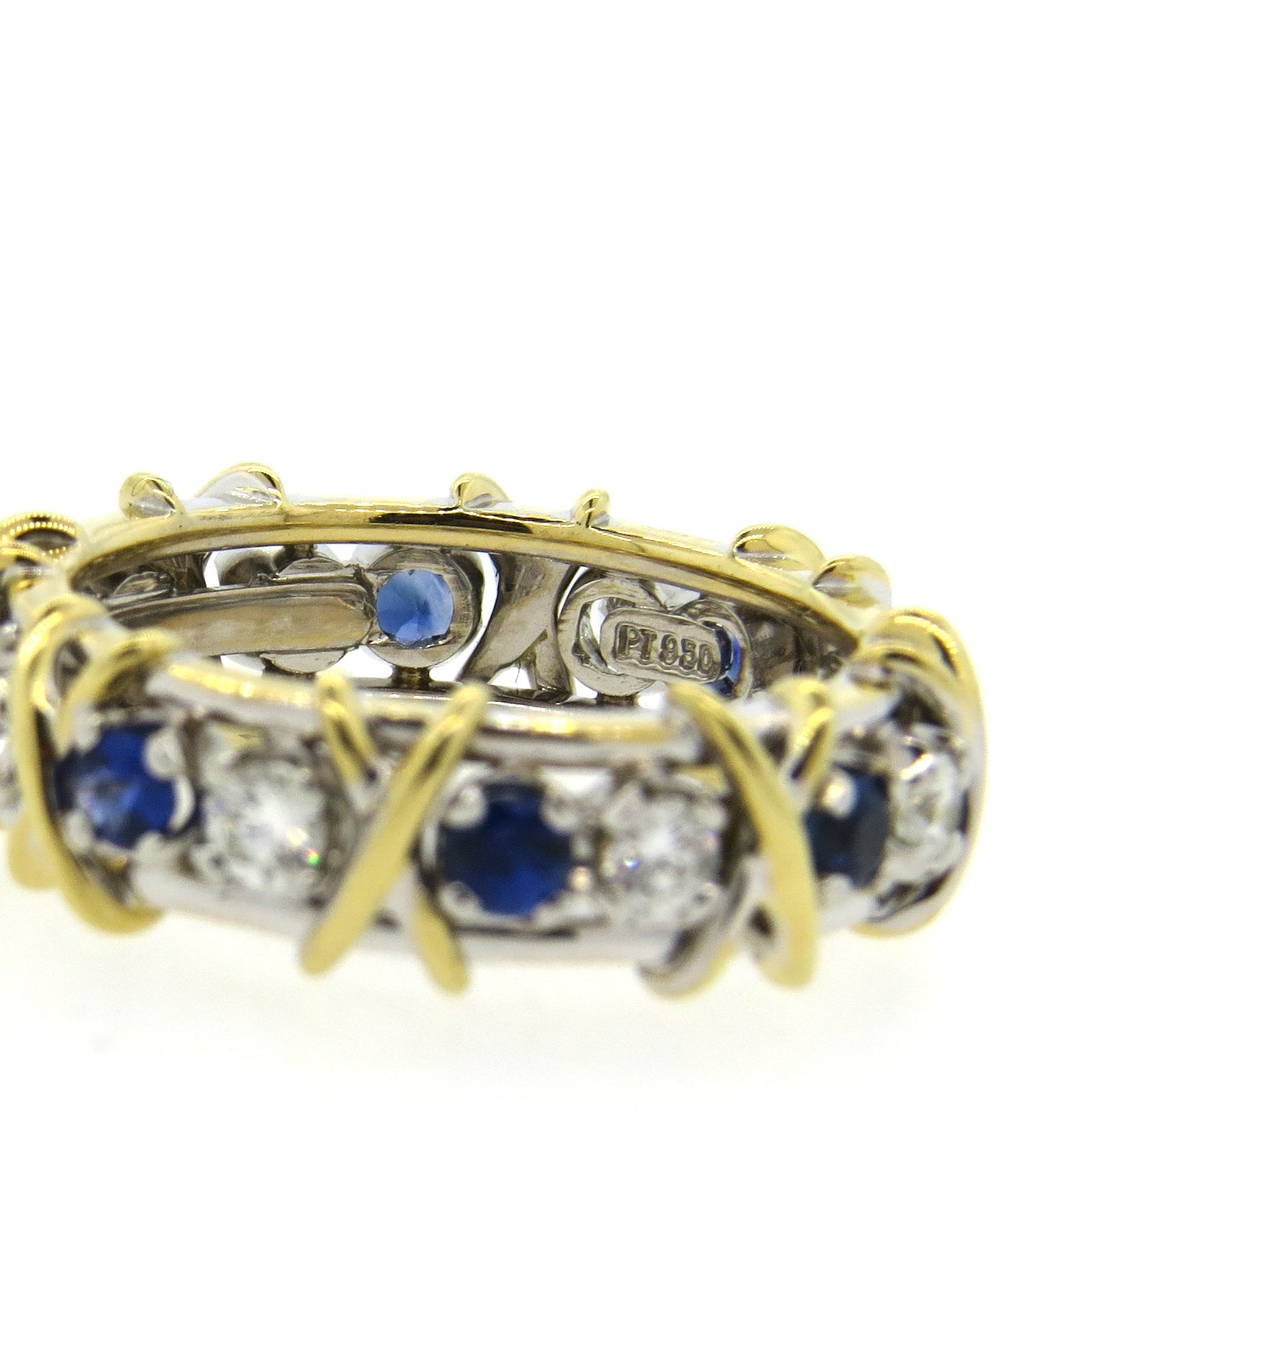 Tiffany & Co band ring, designed by Jean Schlumberger for iconic Sixteen stone collection, set in 18k gold and platinum , featuring approximately 0.59ctw in diamonds and 0.75ctw in blue sapphires. Ring is a size 7 1/2, ring is 7mm wide. Marked